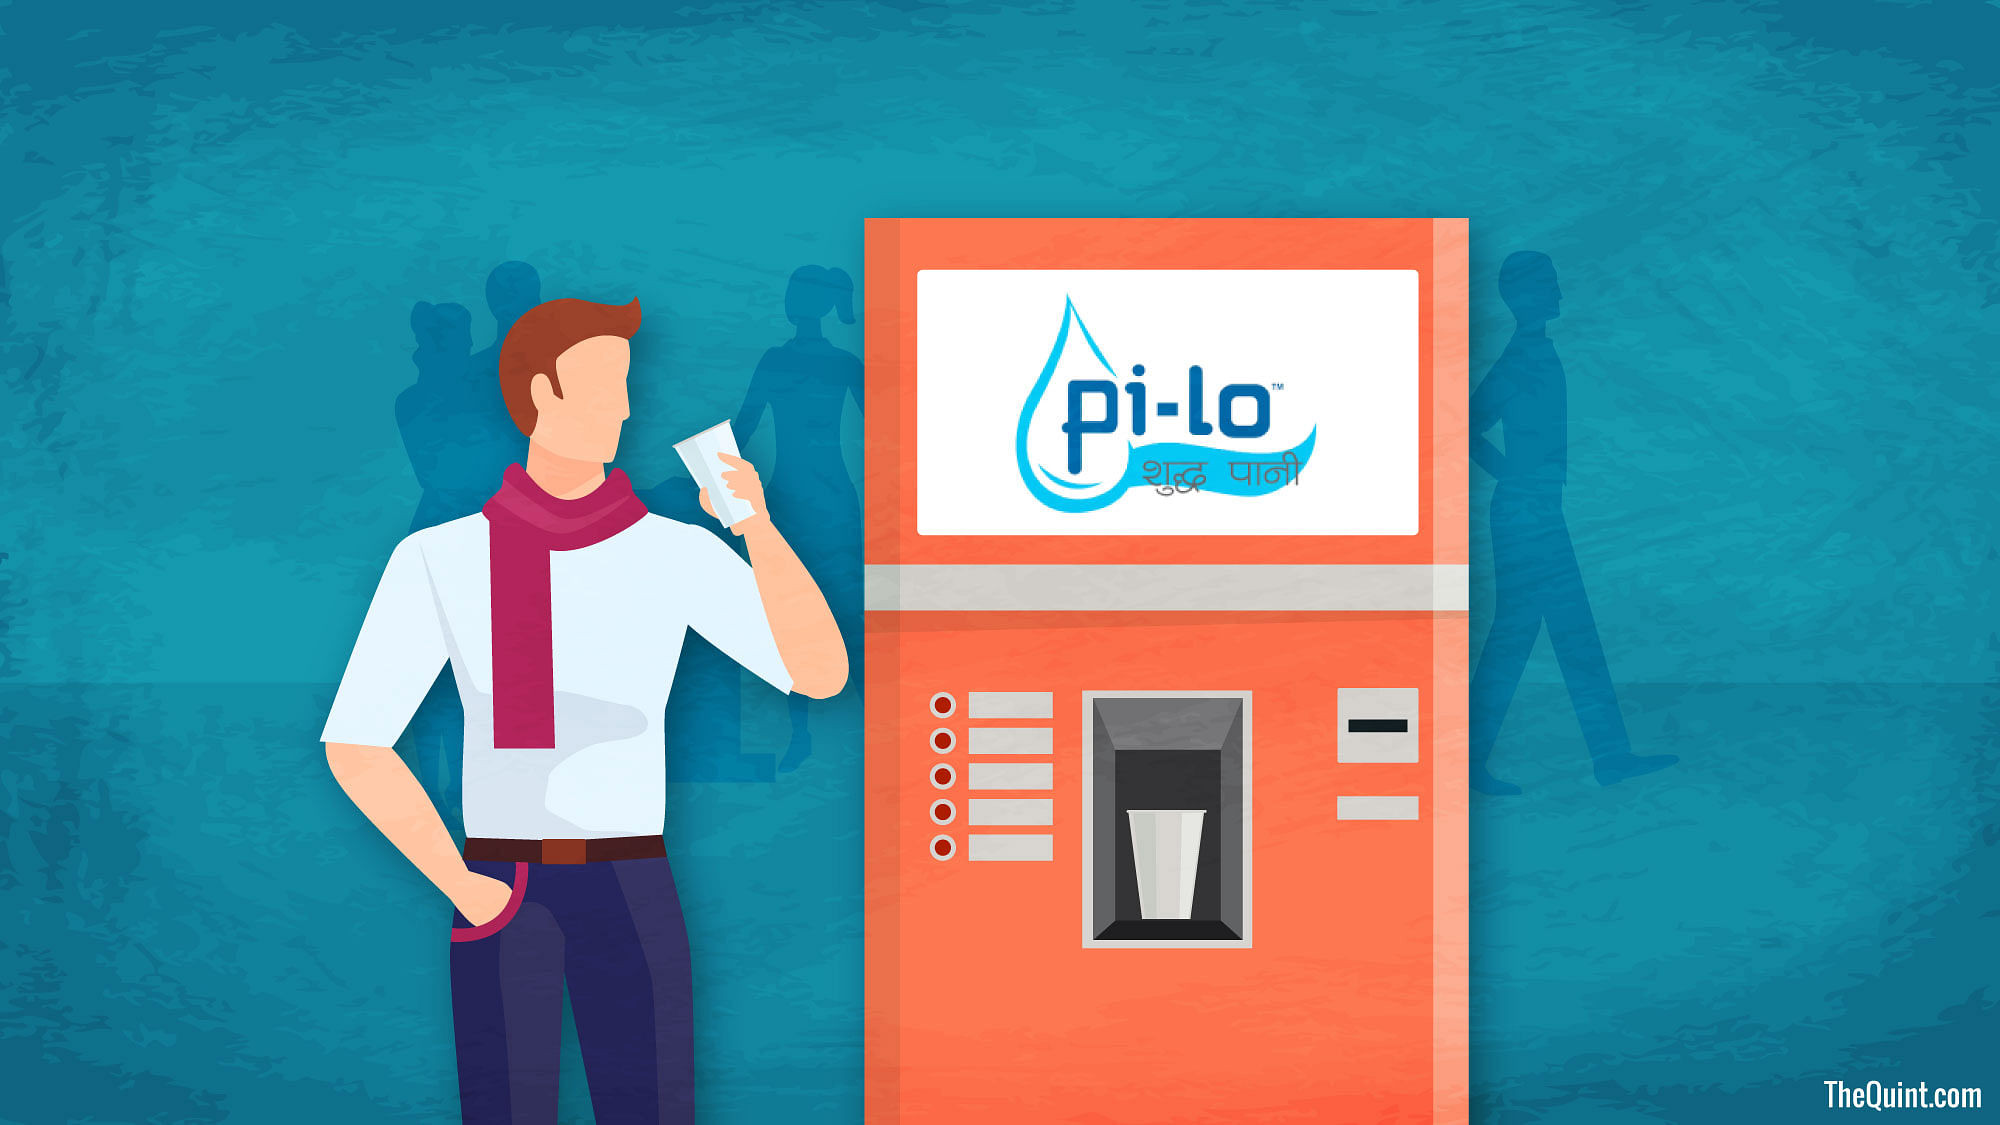 Pi-lo, an automated water-vending machine (<b>Photo:</b> The Quint)